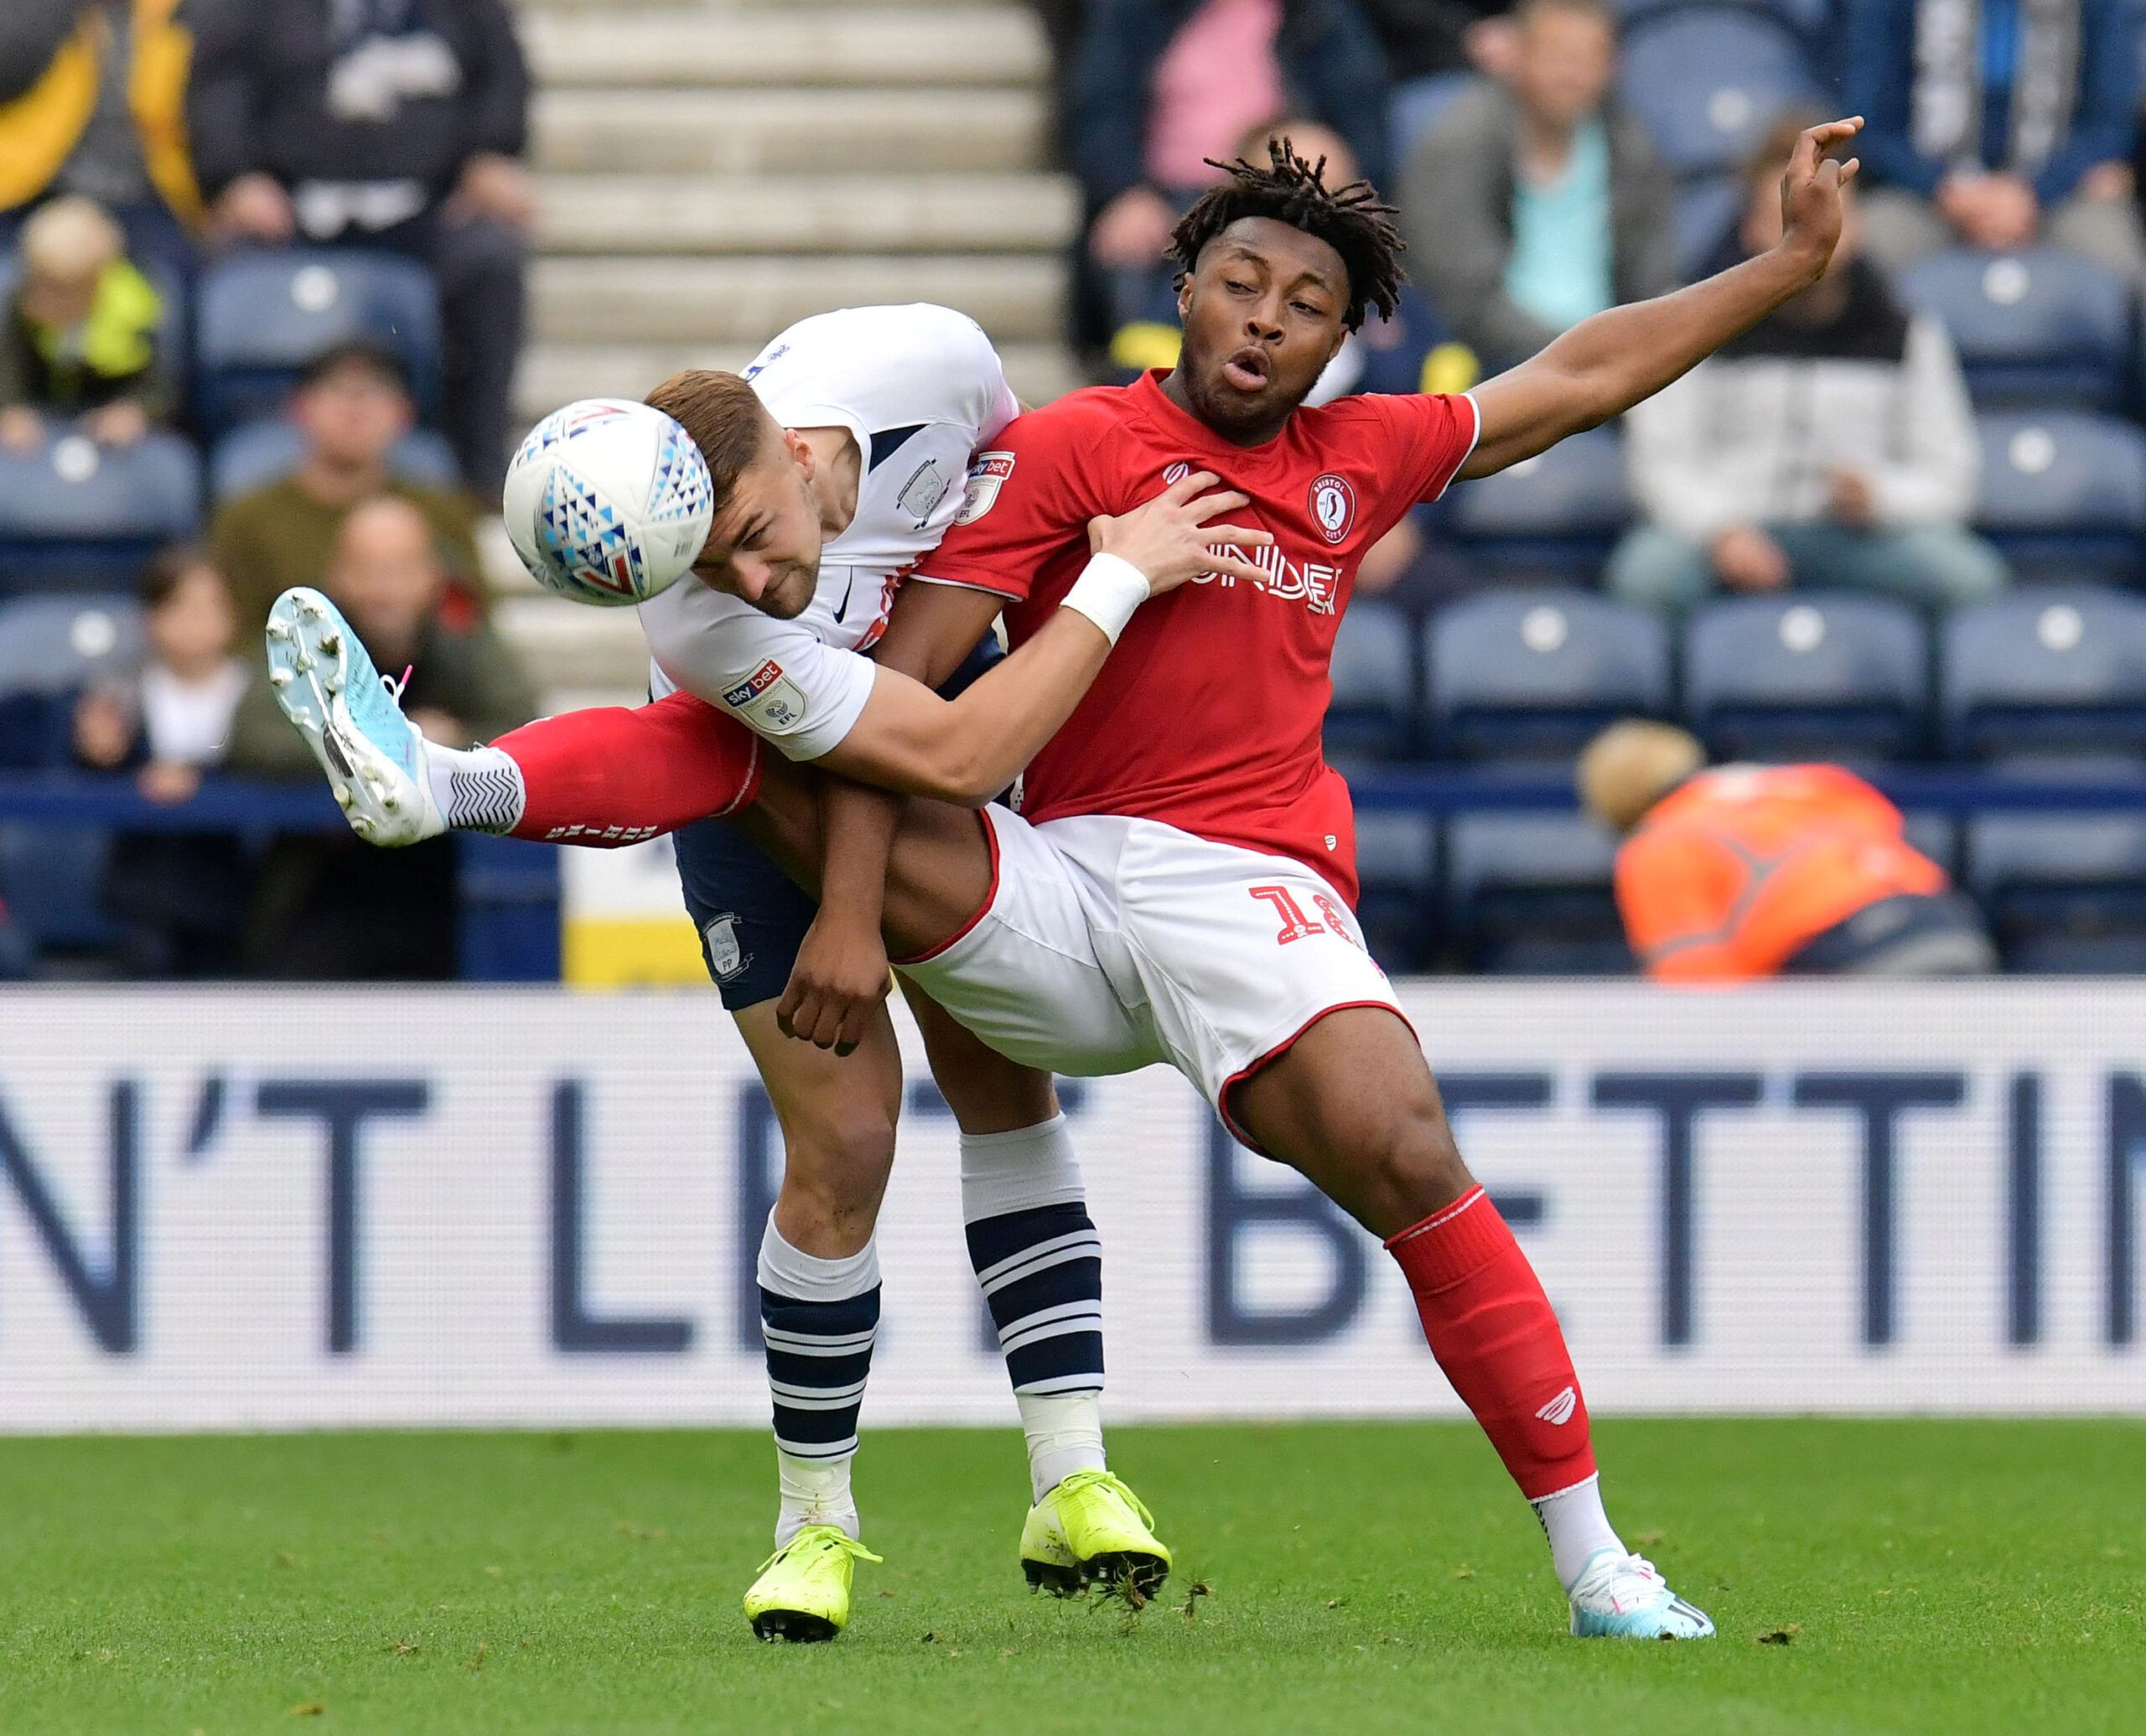 Soccer Football - Championship - Preston North End v Bristol City - Deepdale, Preston, Britain - September 28, 2019   Preston North End's Patrick Bauer in action with Bristol City's Antoine Semenyo   Action Images/Paul Burrows    EDITORIAL USE ONLY. No use with unauthorized audio, video, data, fixture lists, club/league logos or 